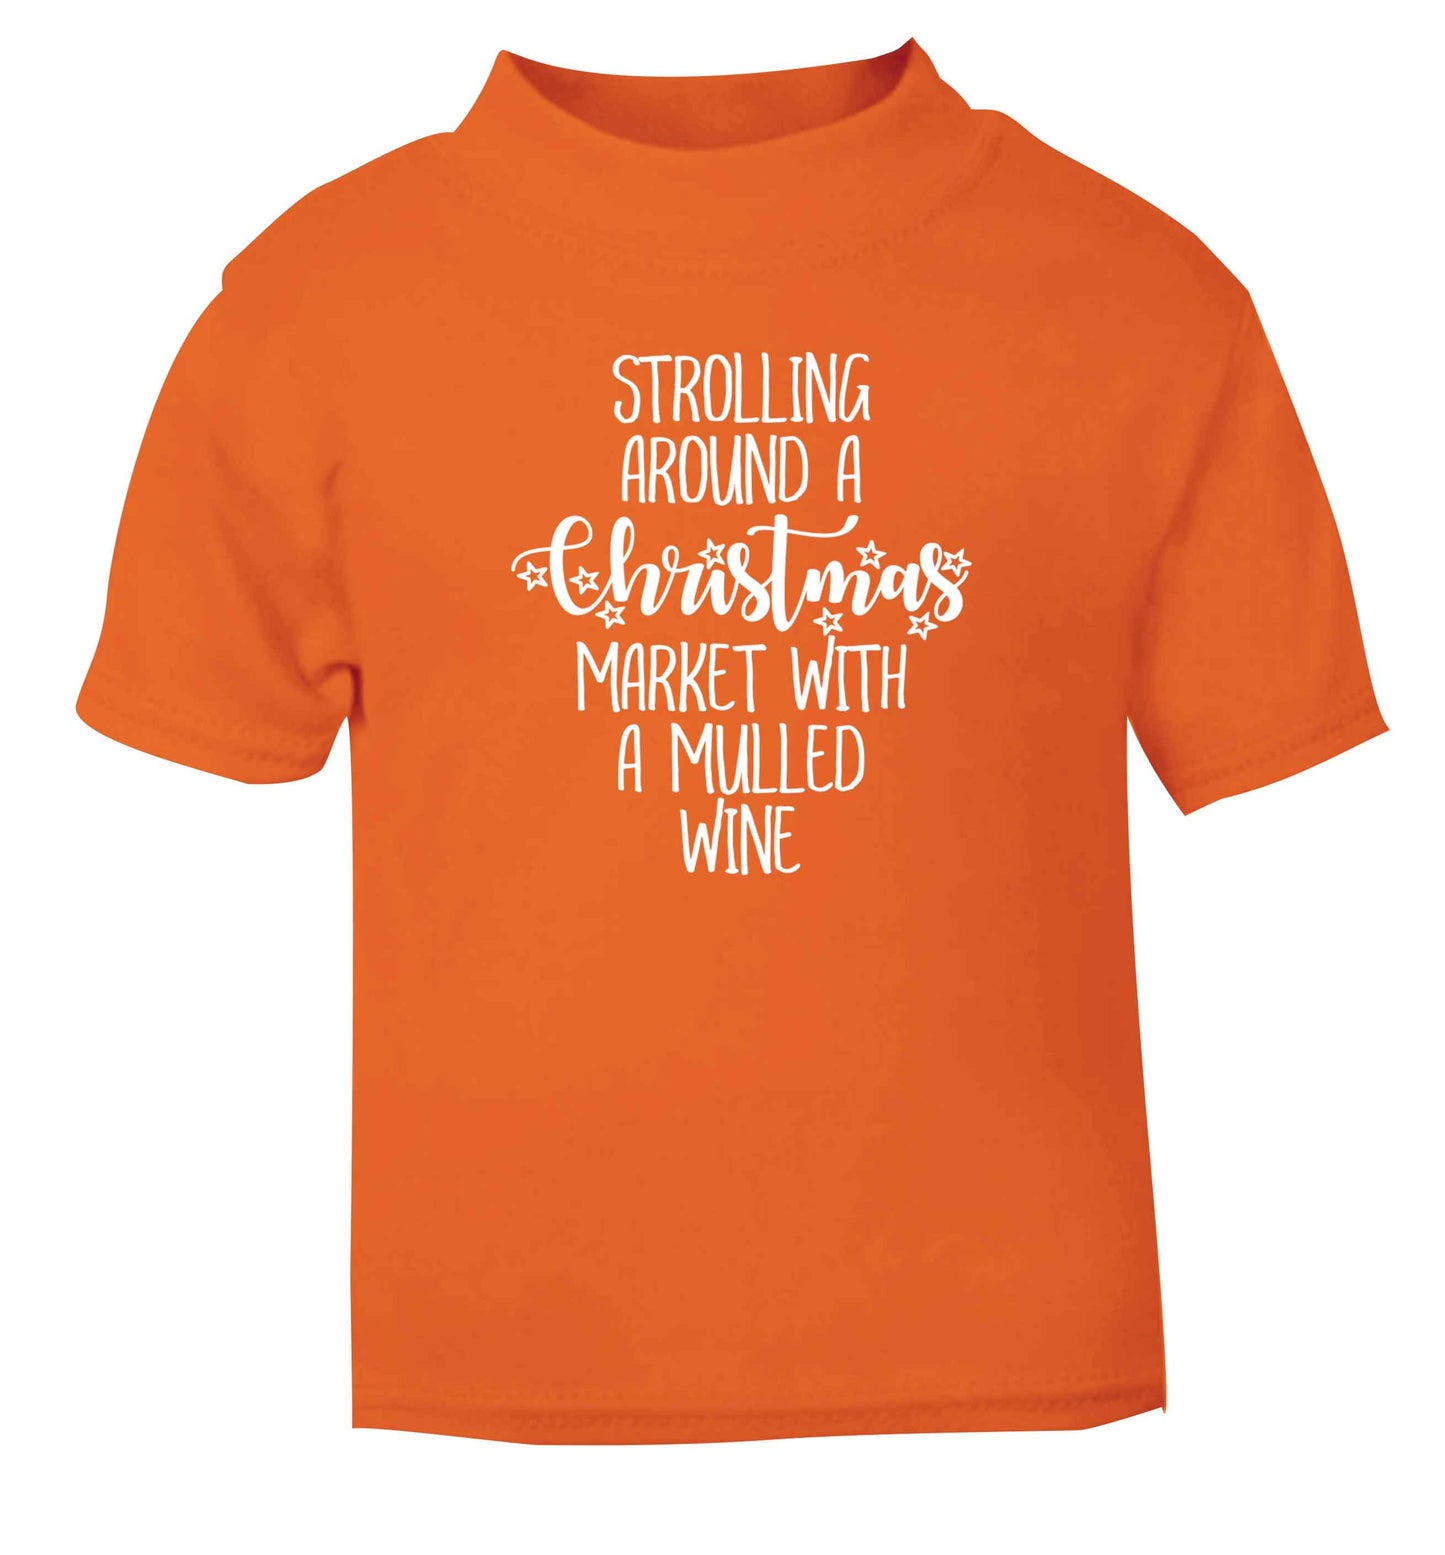 Strolling around a Christmas market with mulled wine orange Baby Toddler Tshirt 2 Years